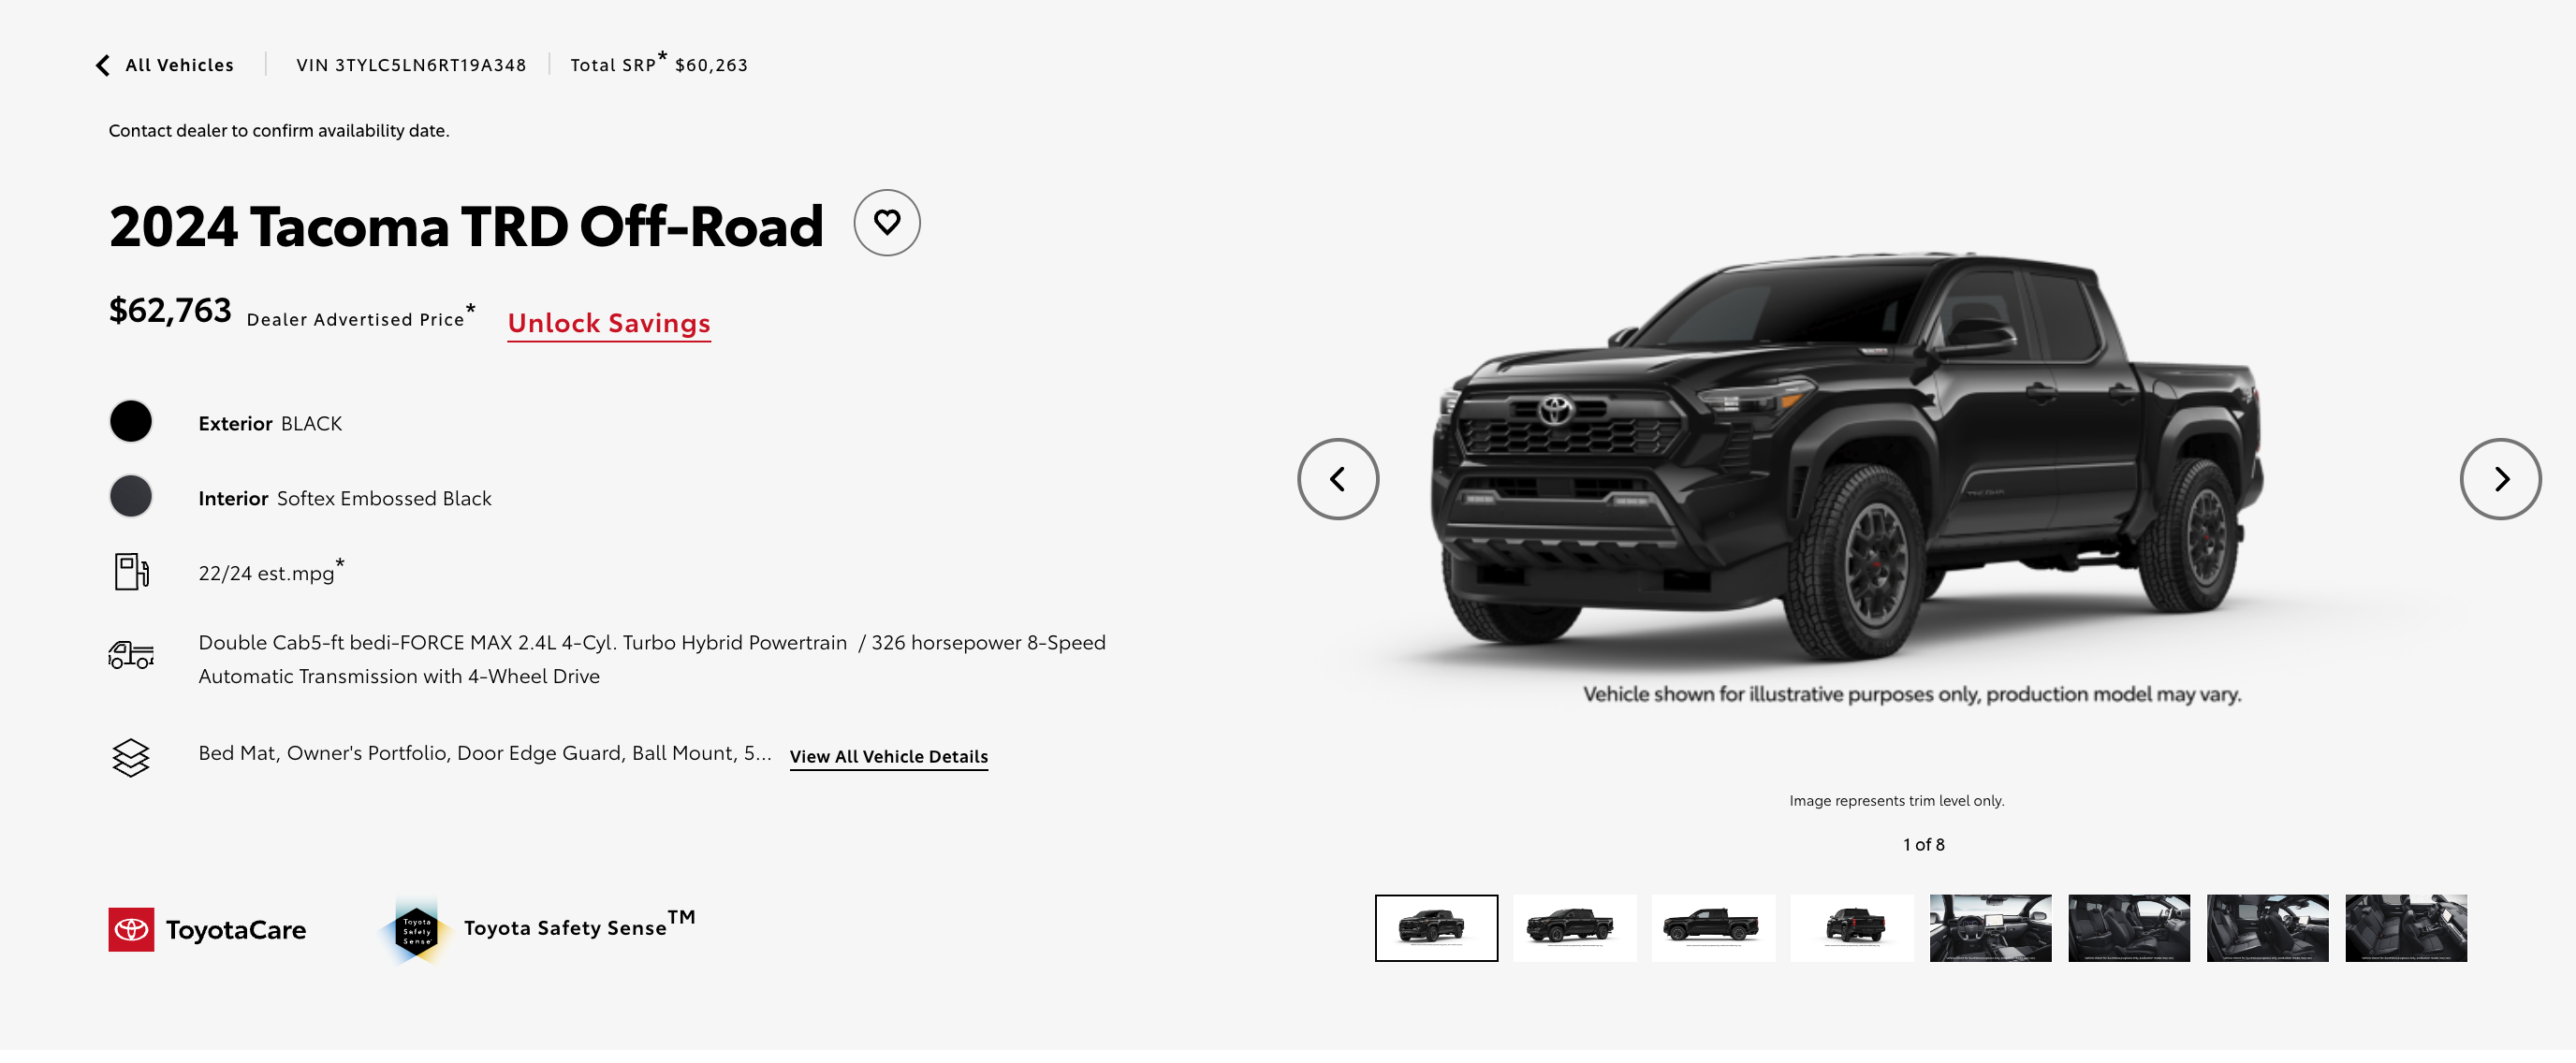 2024 Tacoma HYBRID Tacomas Inventory Search Now Live on Toyota Site Screenshot 2024-05-10 at 7.27.11 AM